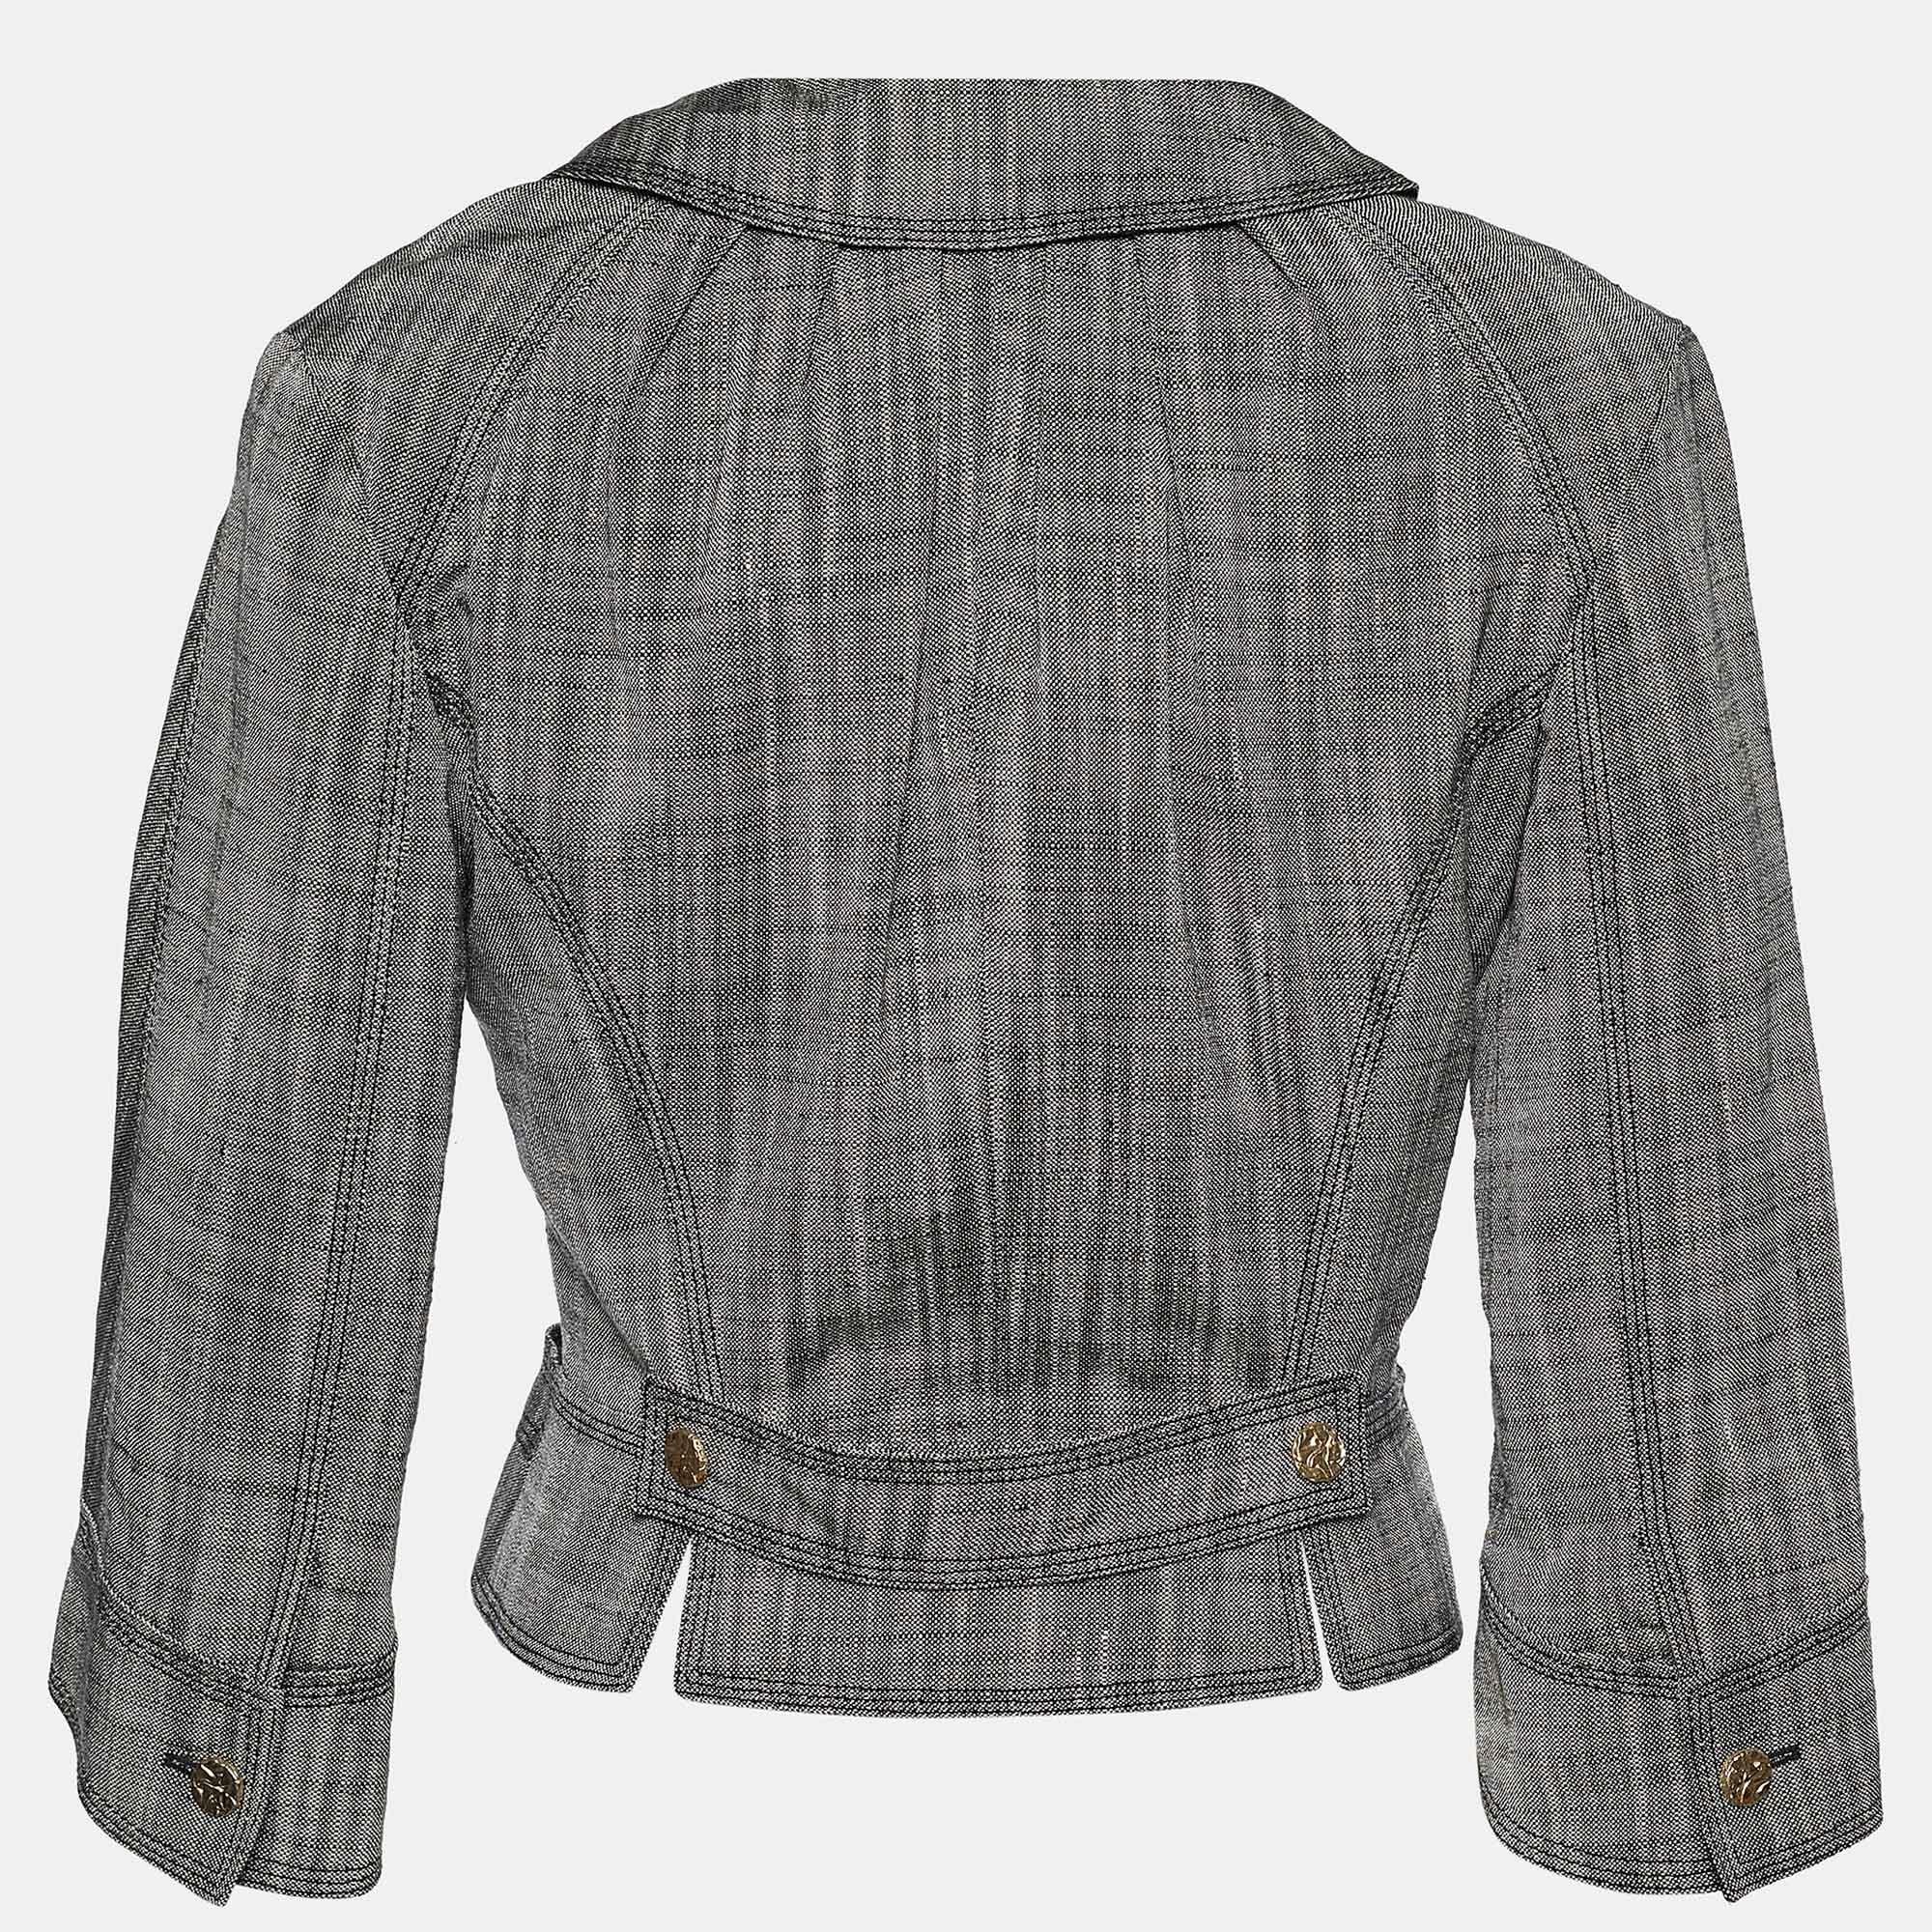 Louis Vuitton's sartorial taste is fine as it can get, and this stunning blazer is the evidence of that! Fashioned neatly from grey textured silk, this blazer carries a double-breasted profile with a cropped fit and gold-tone button embellishments.